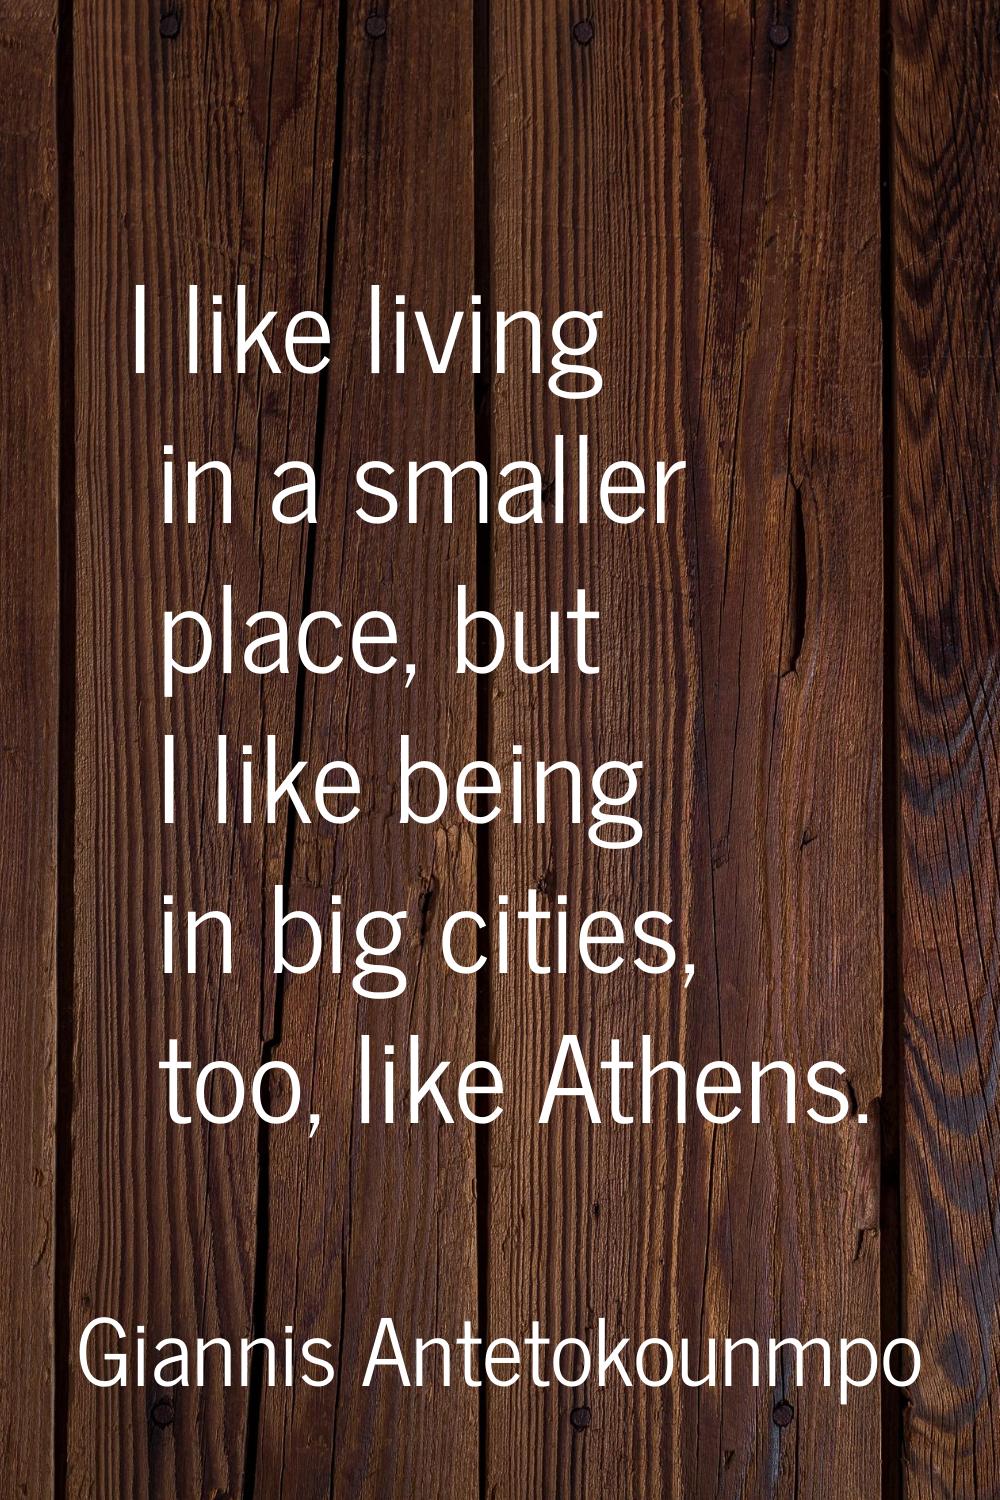 I like living in a smaller place, but I like being in big cities, too, like Athens.